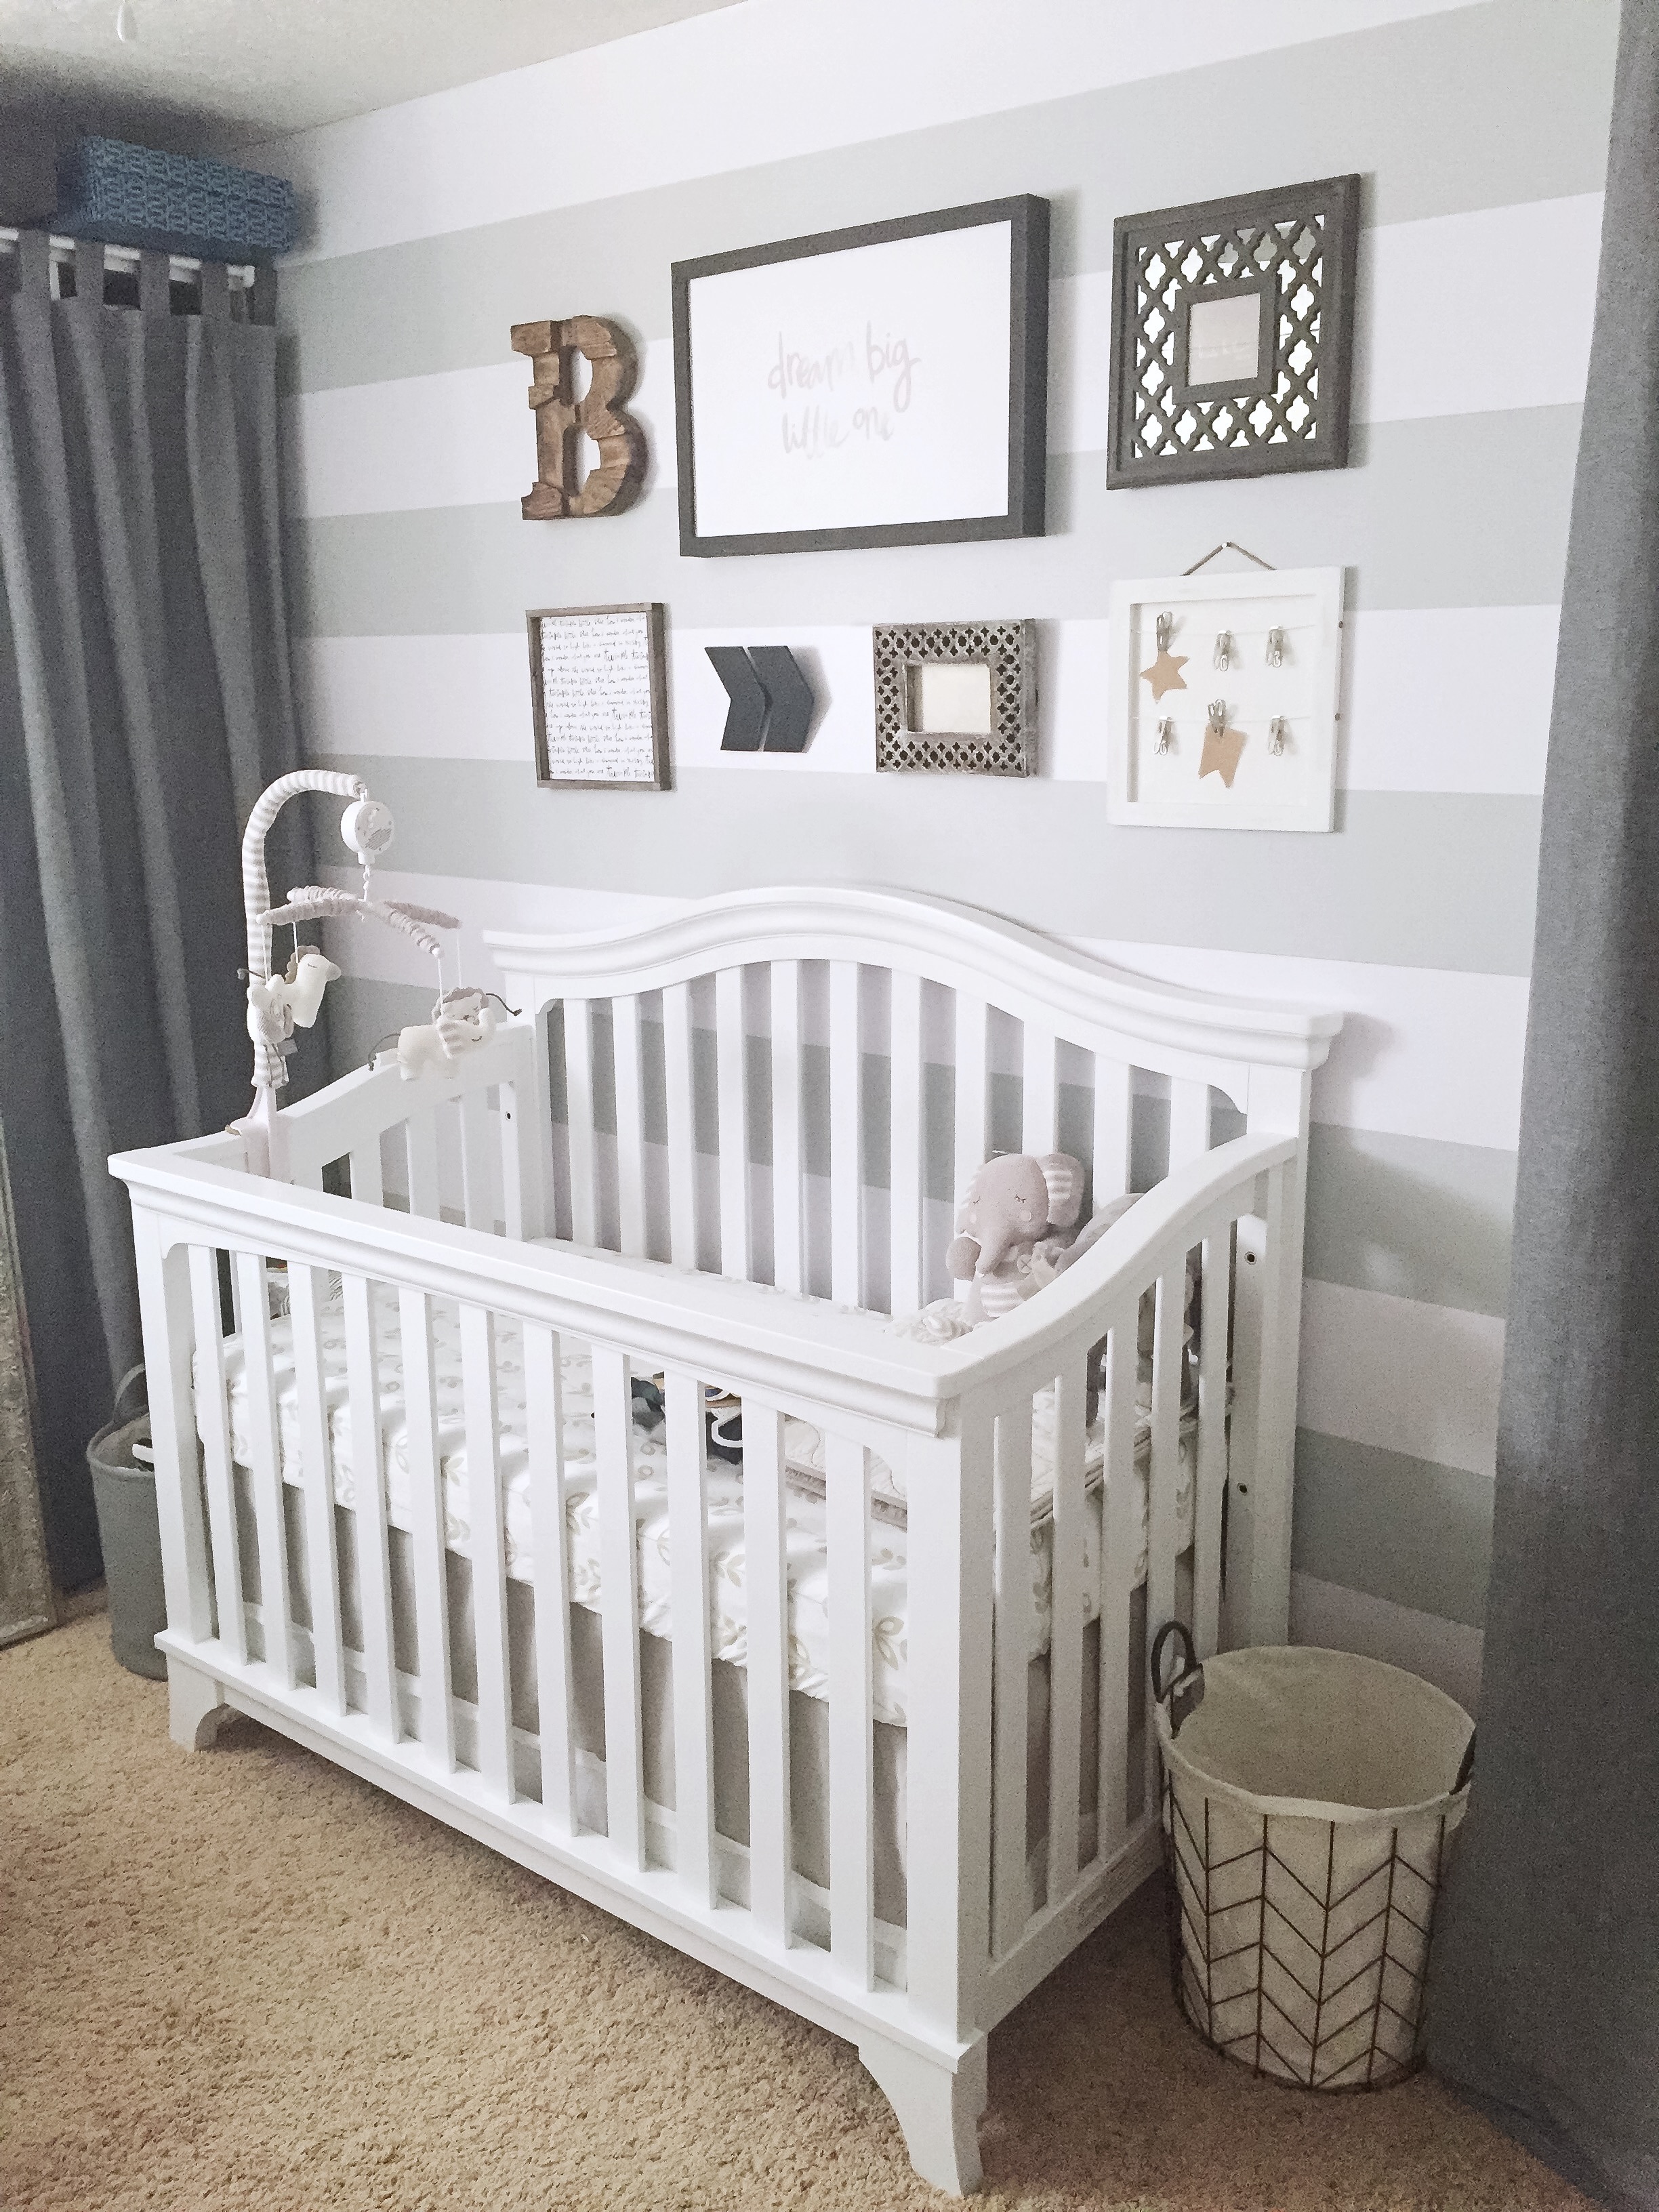 How to Transform a Small Room Into the Perfect Baby ...